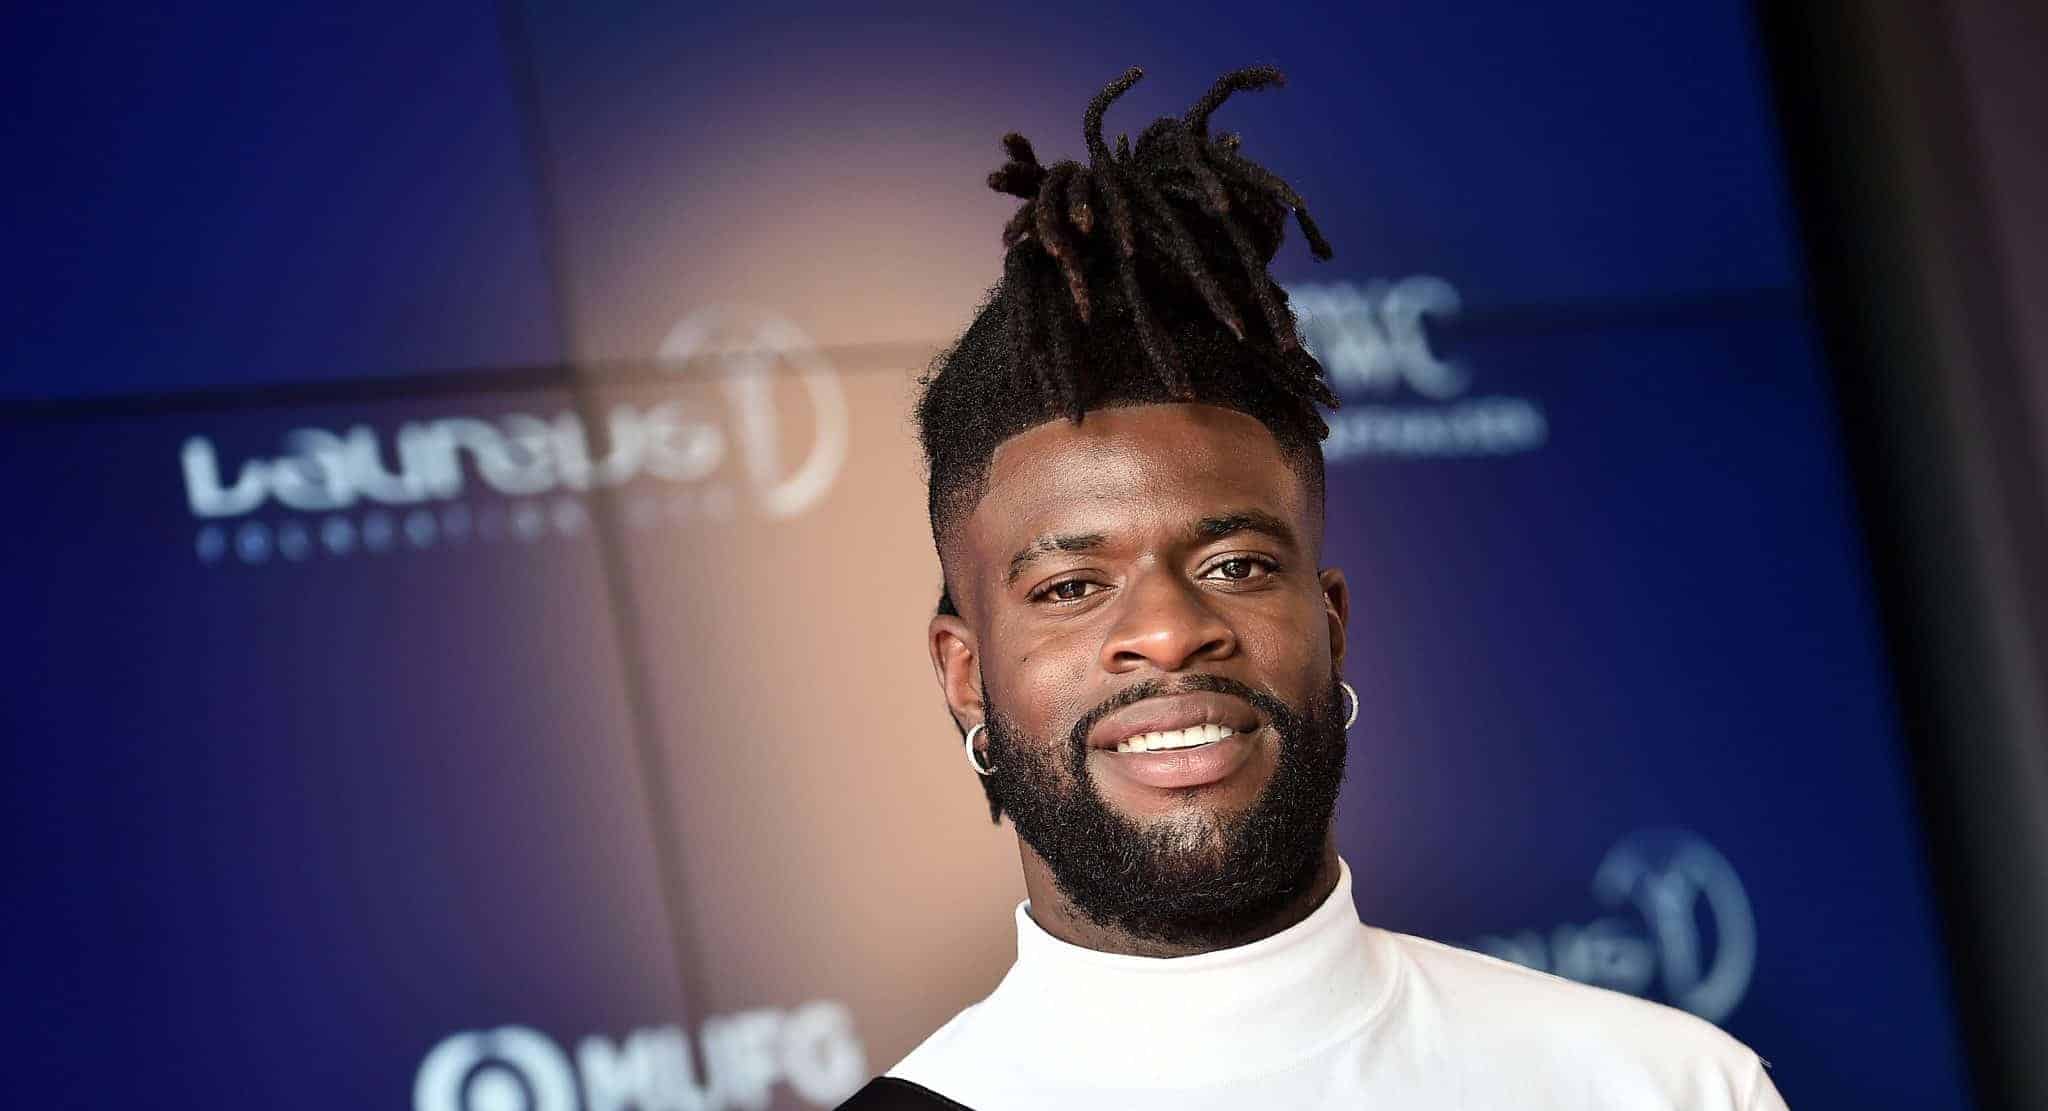 NEW YORK, NEW YORK - SEPTEMBER 10: Reggie Bullock attends the 2019 Laureus Fashion Show Gala during New York Fashion Week, bringing together sport and fashion to shine a light on Sport for Good at Mercedes-Benz Manhattan on September 10, 2019 in New York City.